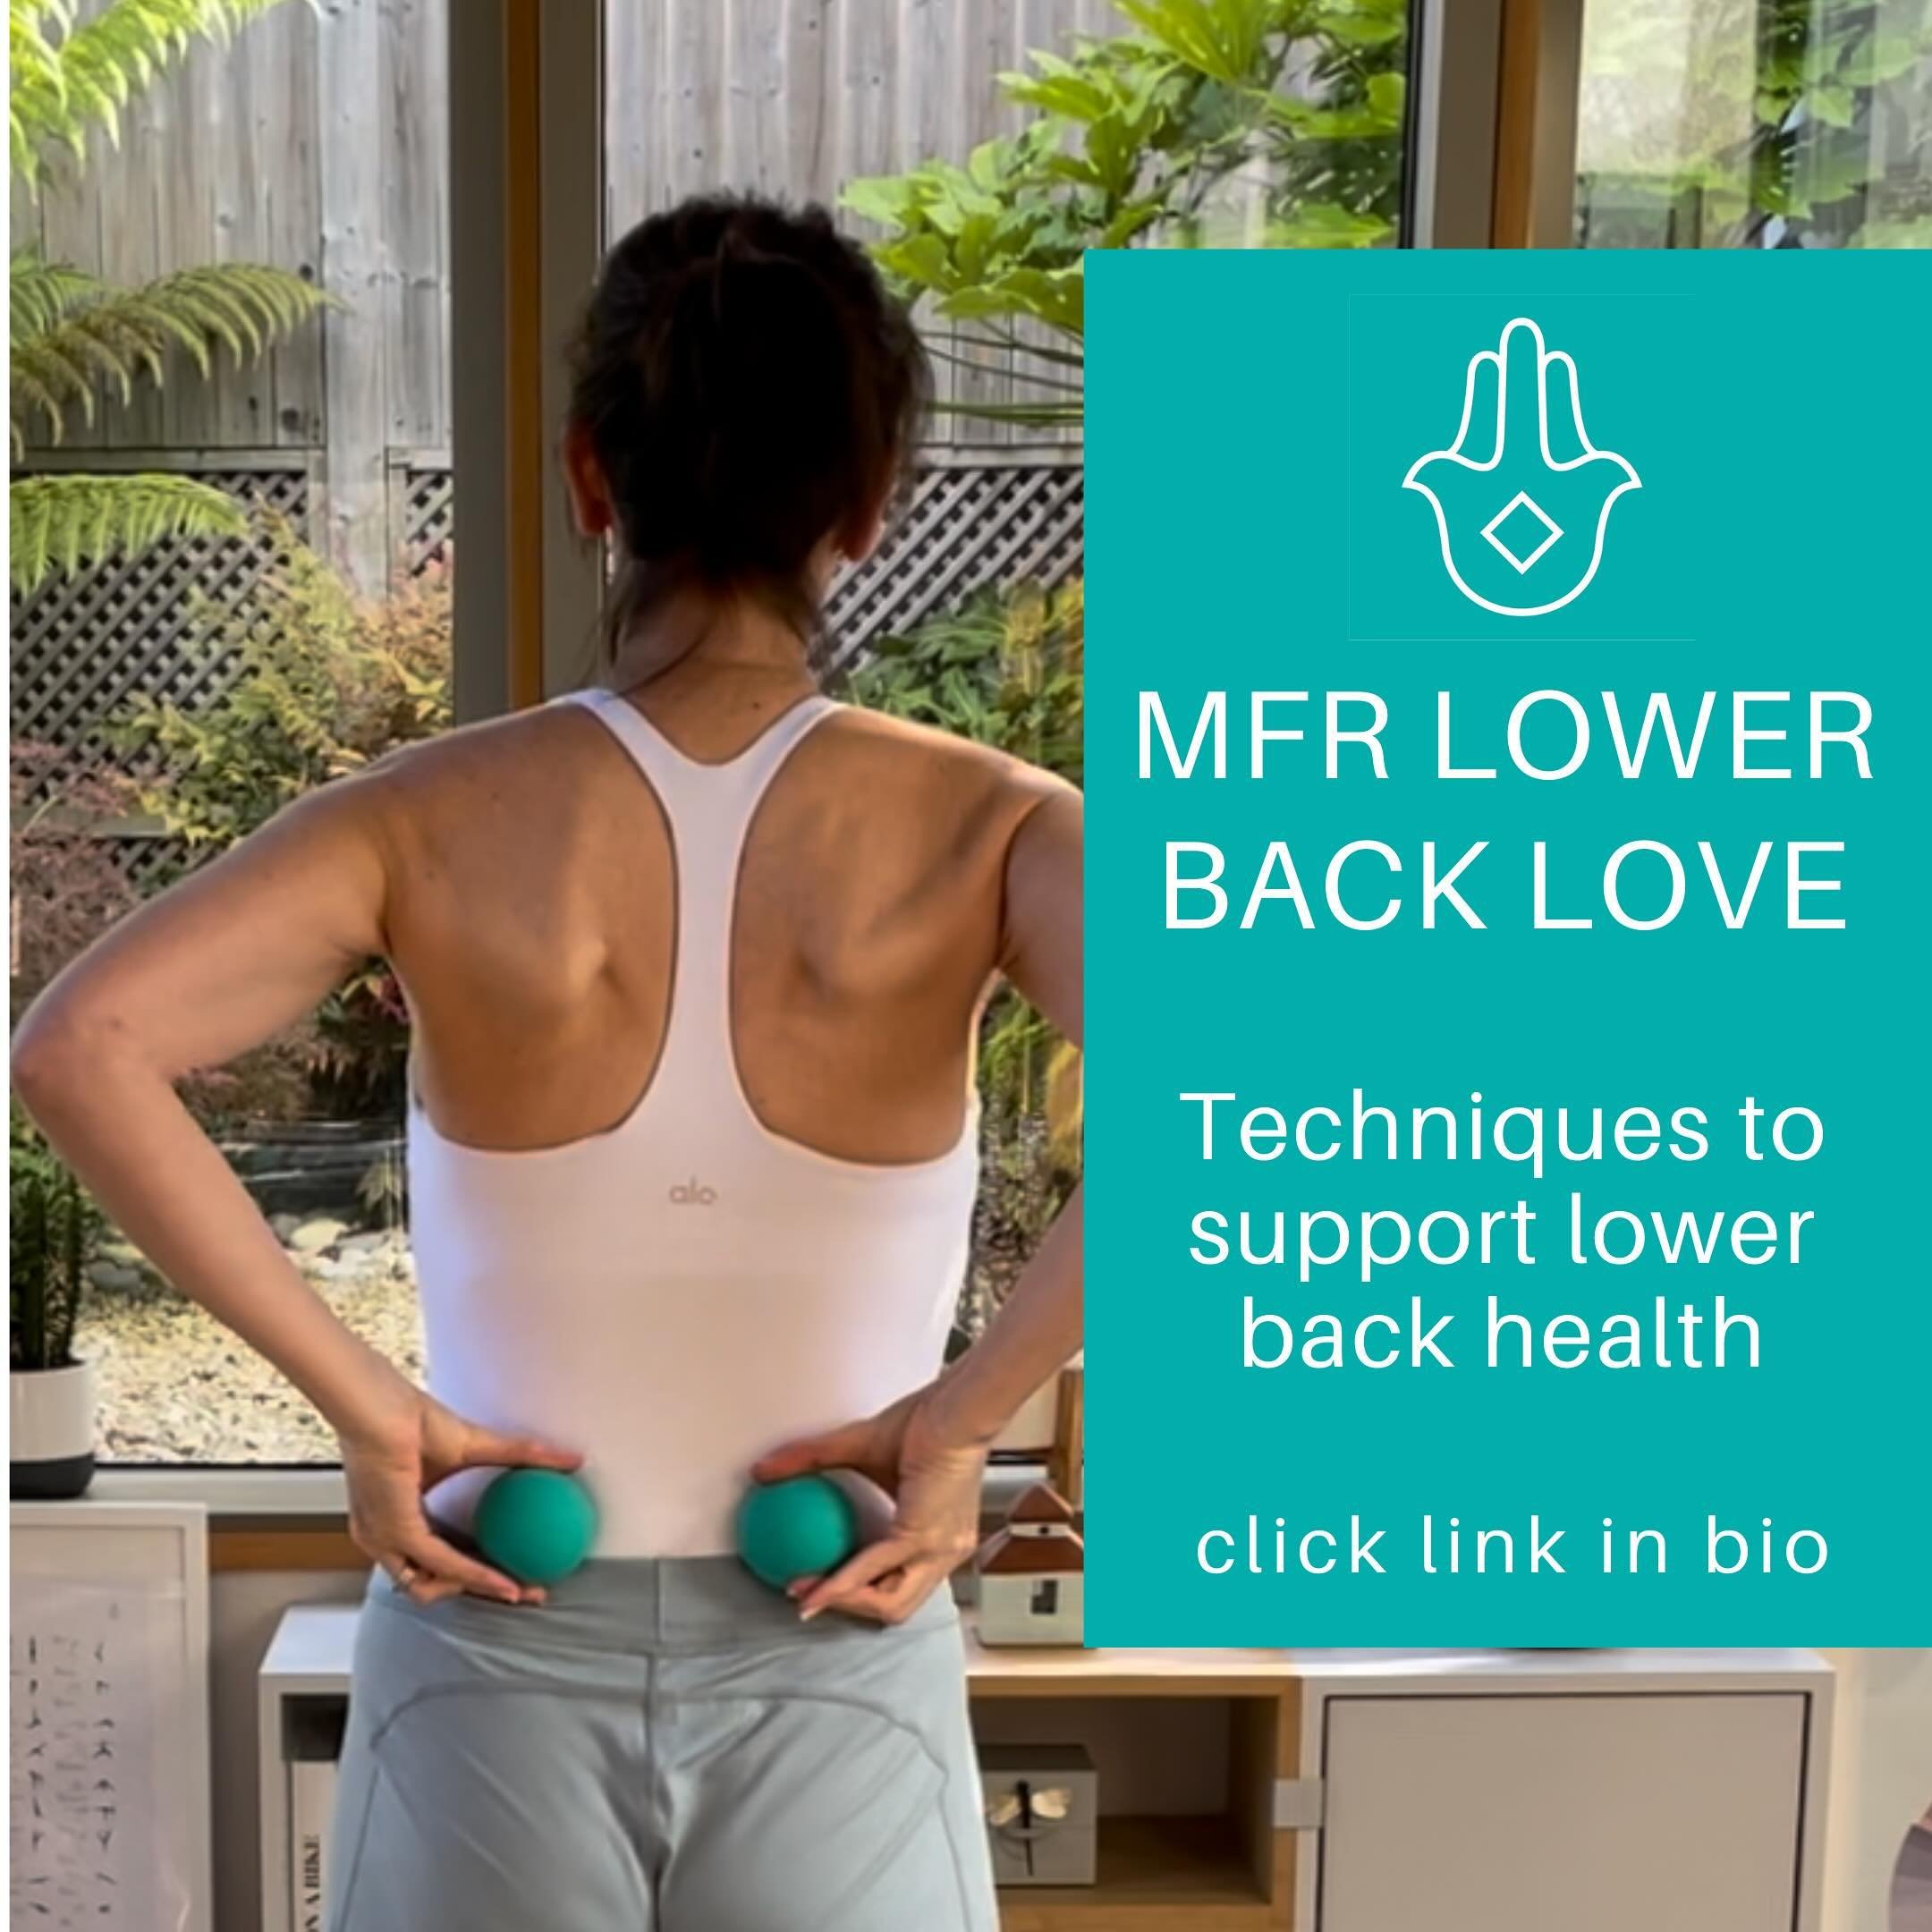 MFR LOWER BACK LOVE ONLINE WORKSHOP THIS SATURDAY!!! Nagging lower back pain? MFR is an essential tool to support lower back health. It helps with tissue hydration, circulation, stiffness &amp; most importantly pain management. Join my oine workshop 